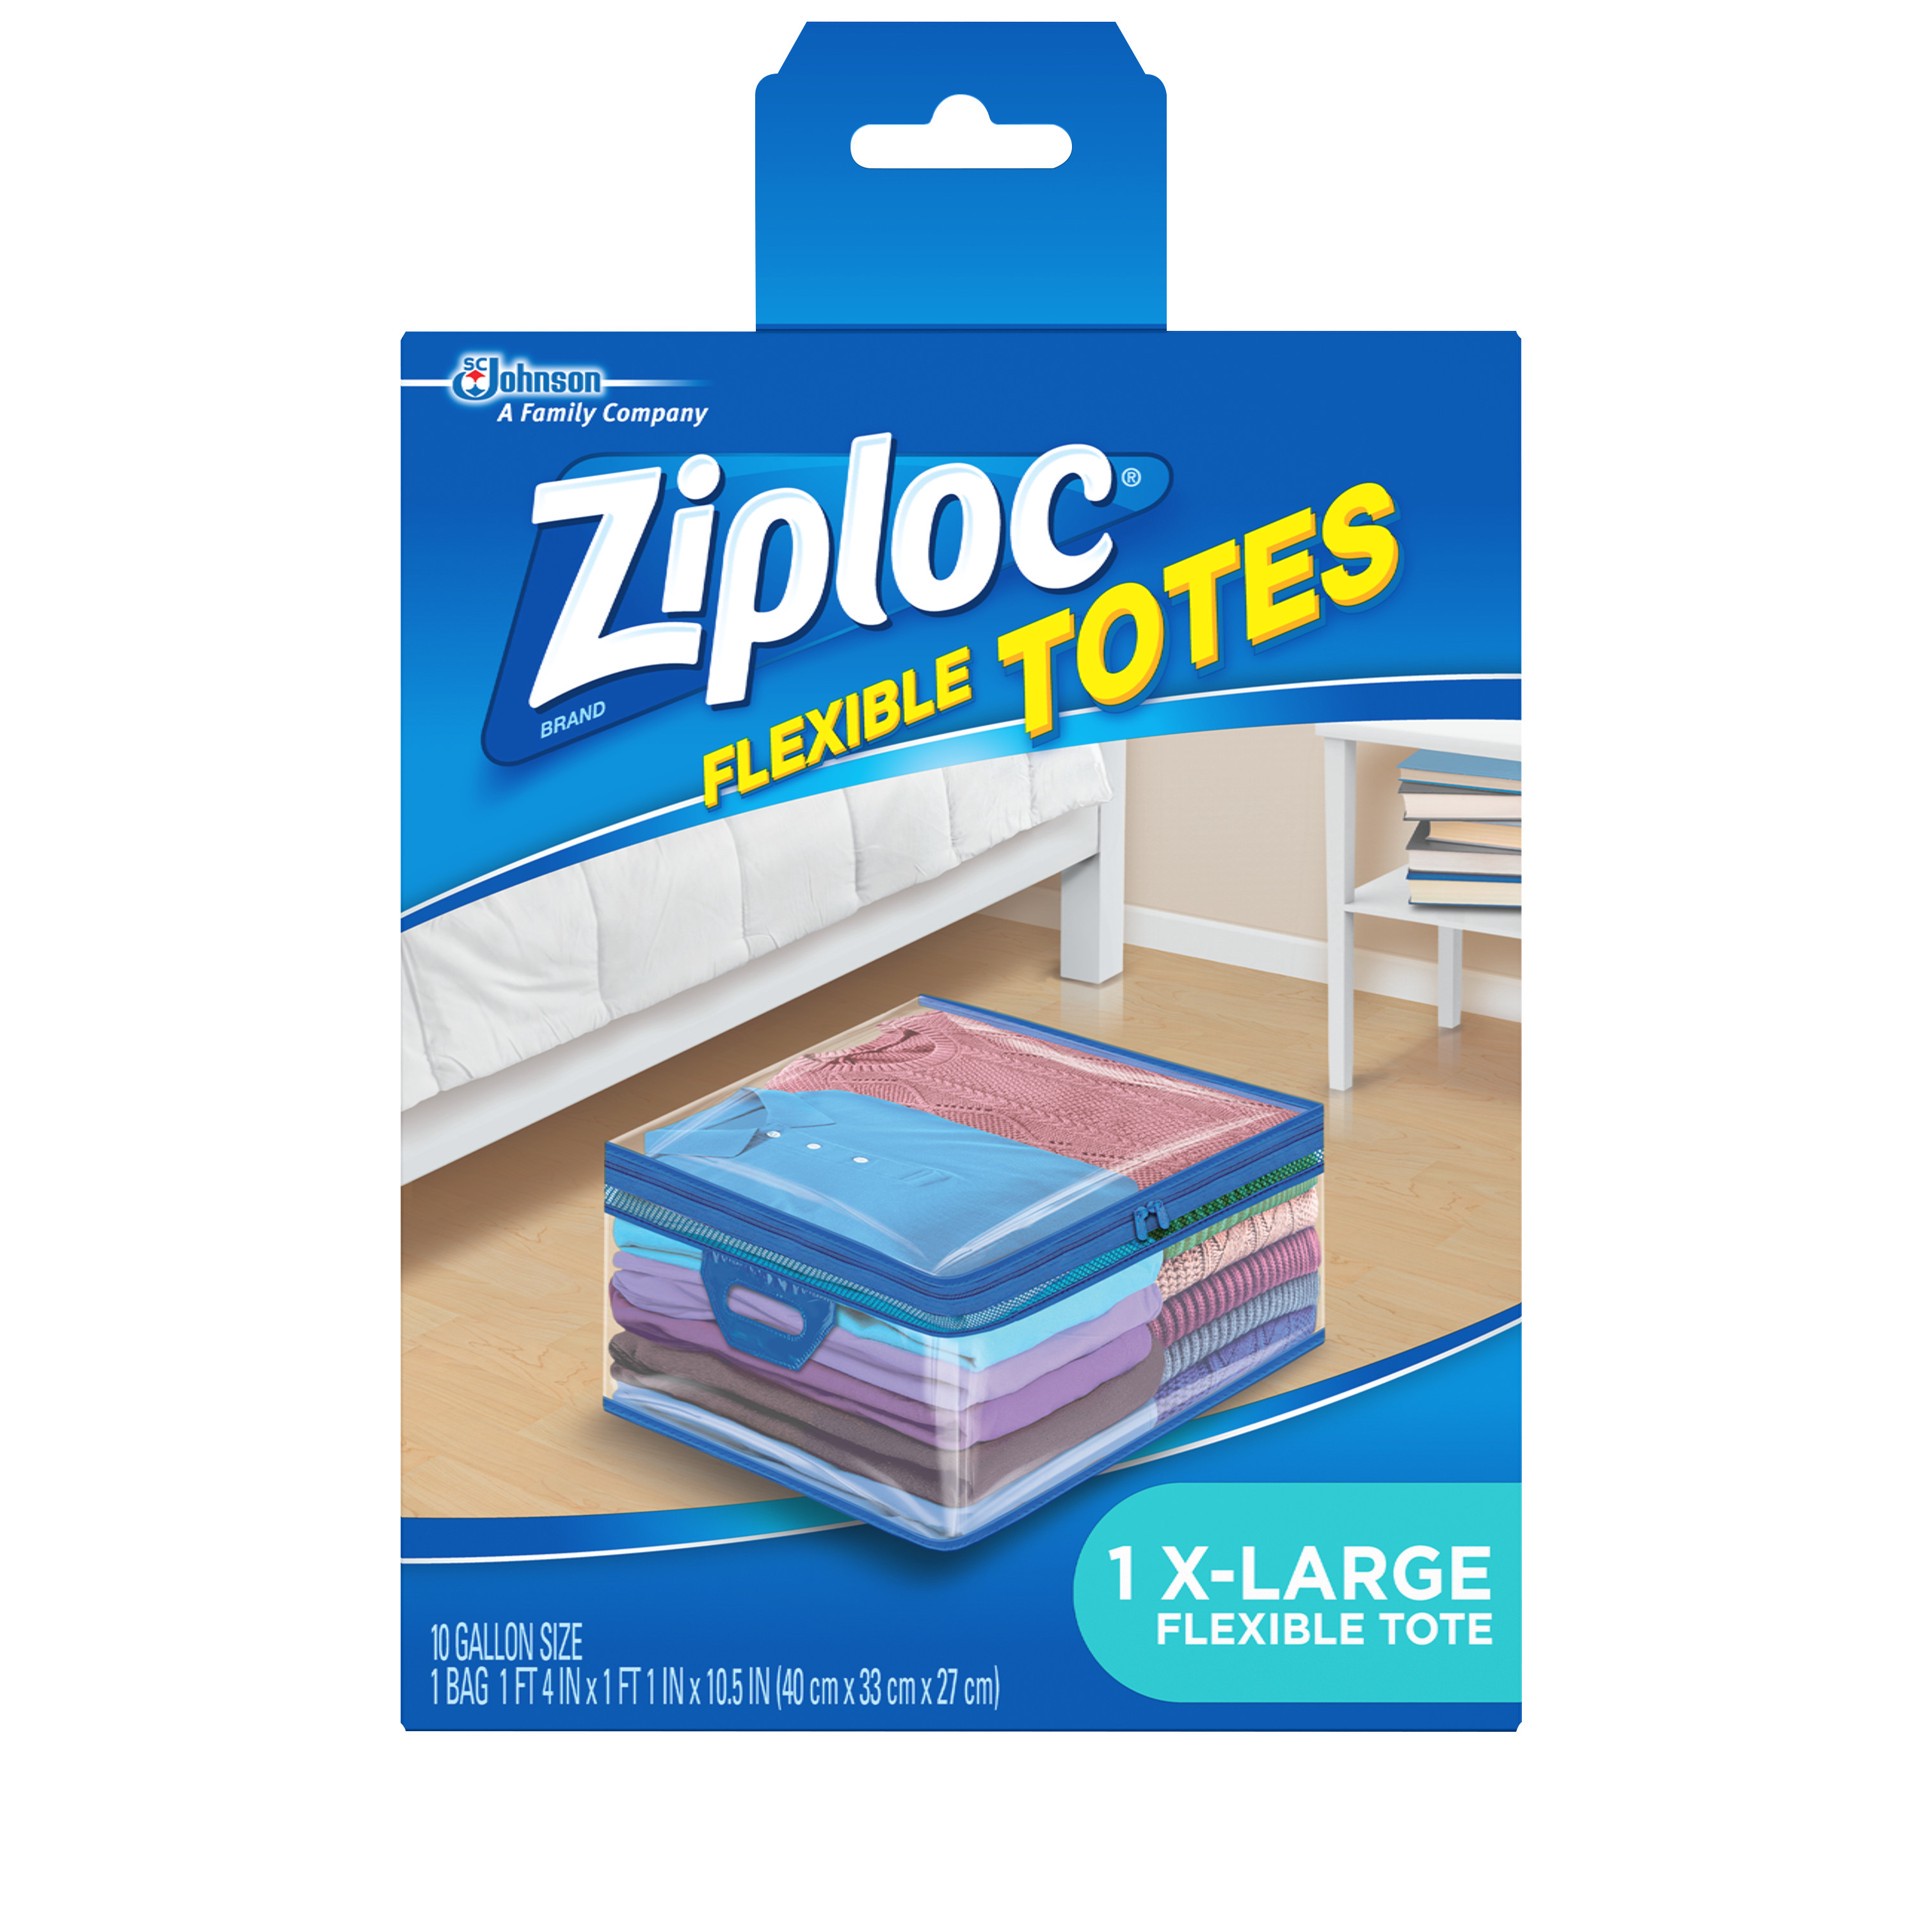 slide 1 of 9, Ziploc Flexible Totes, X-Large, 1 CT, Easy-Close Zipper, Soft-Sided, Rectangular Bags, Built-In Handles, Thick Semi-Transparent Plastic, Flexible to Fit Where You Want Them, 1 ct